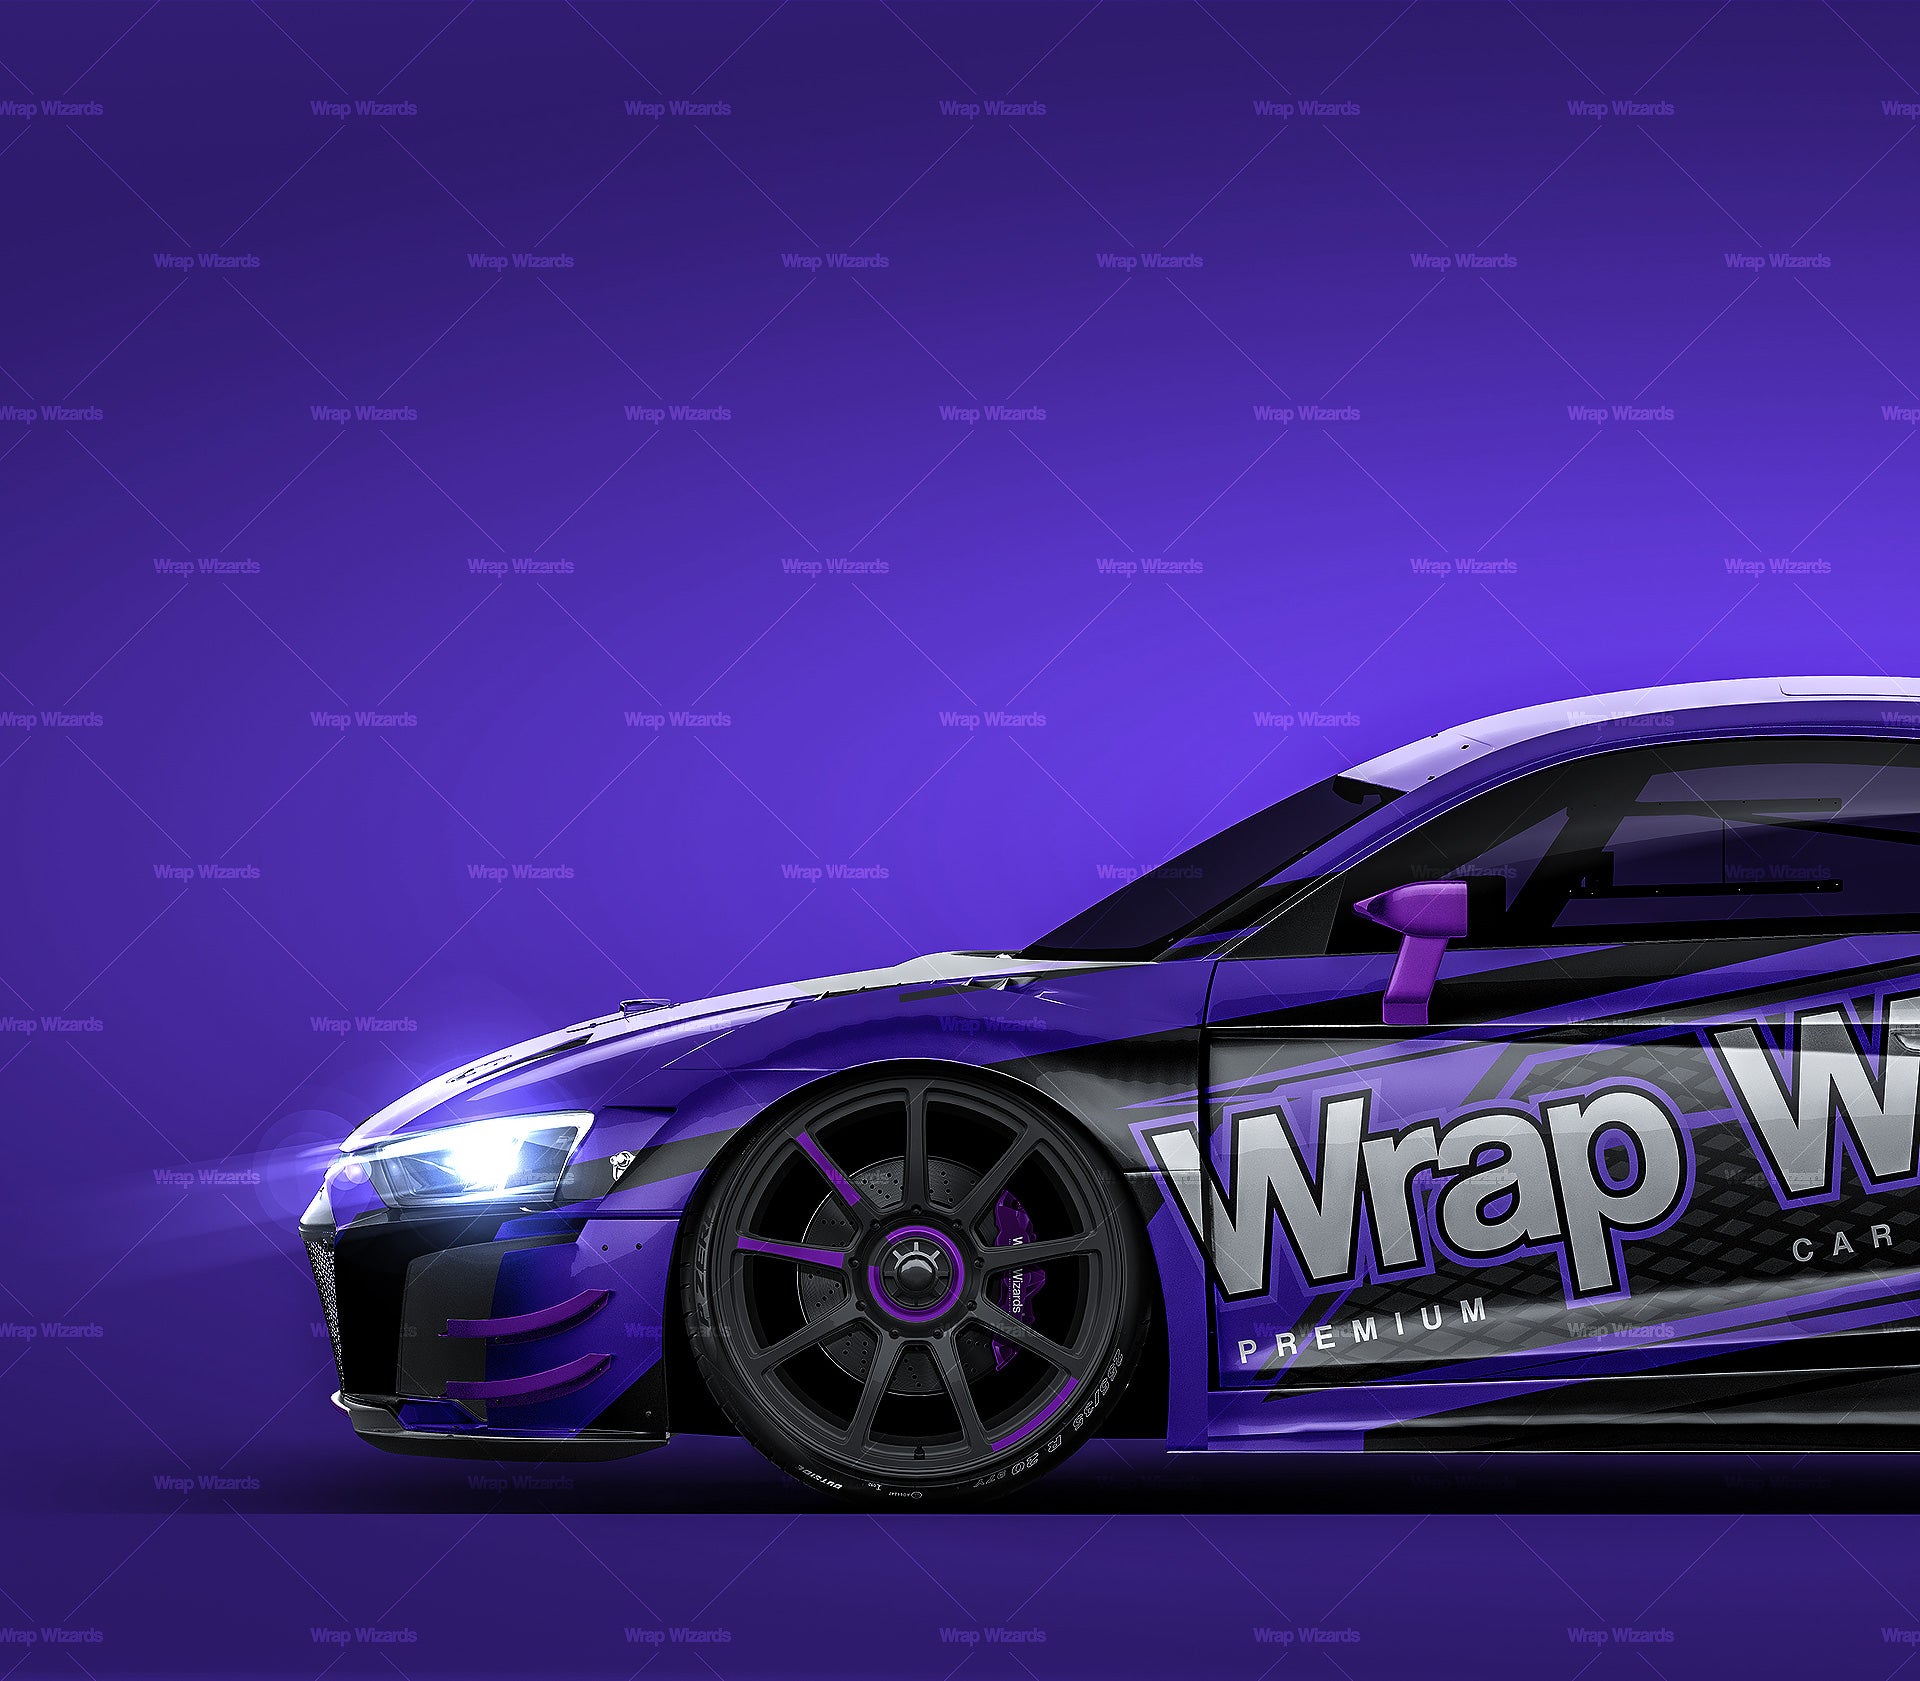 Audi R8 LMS GT3 glossy finish - all sides Car Mockup Template.psd